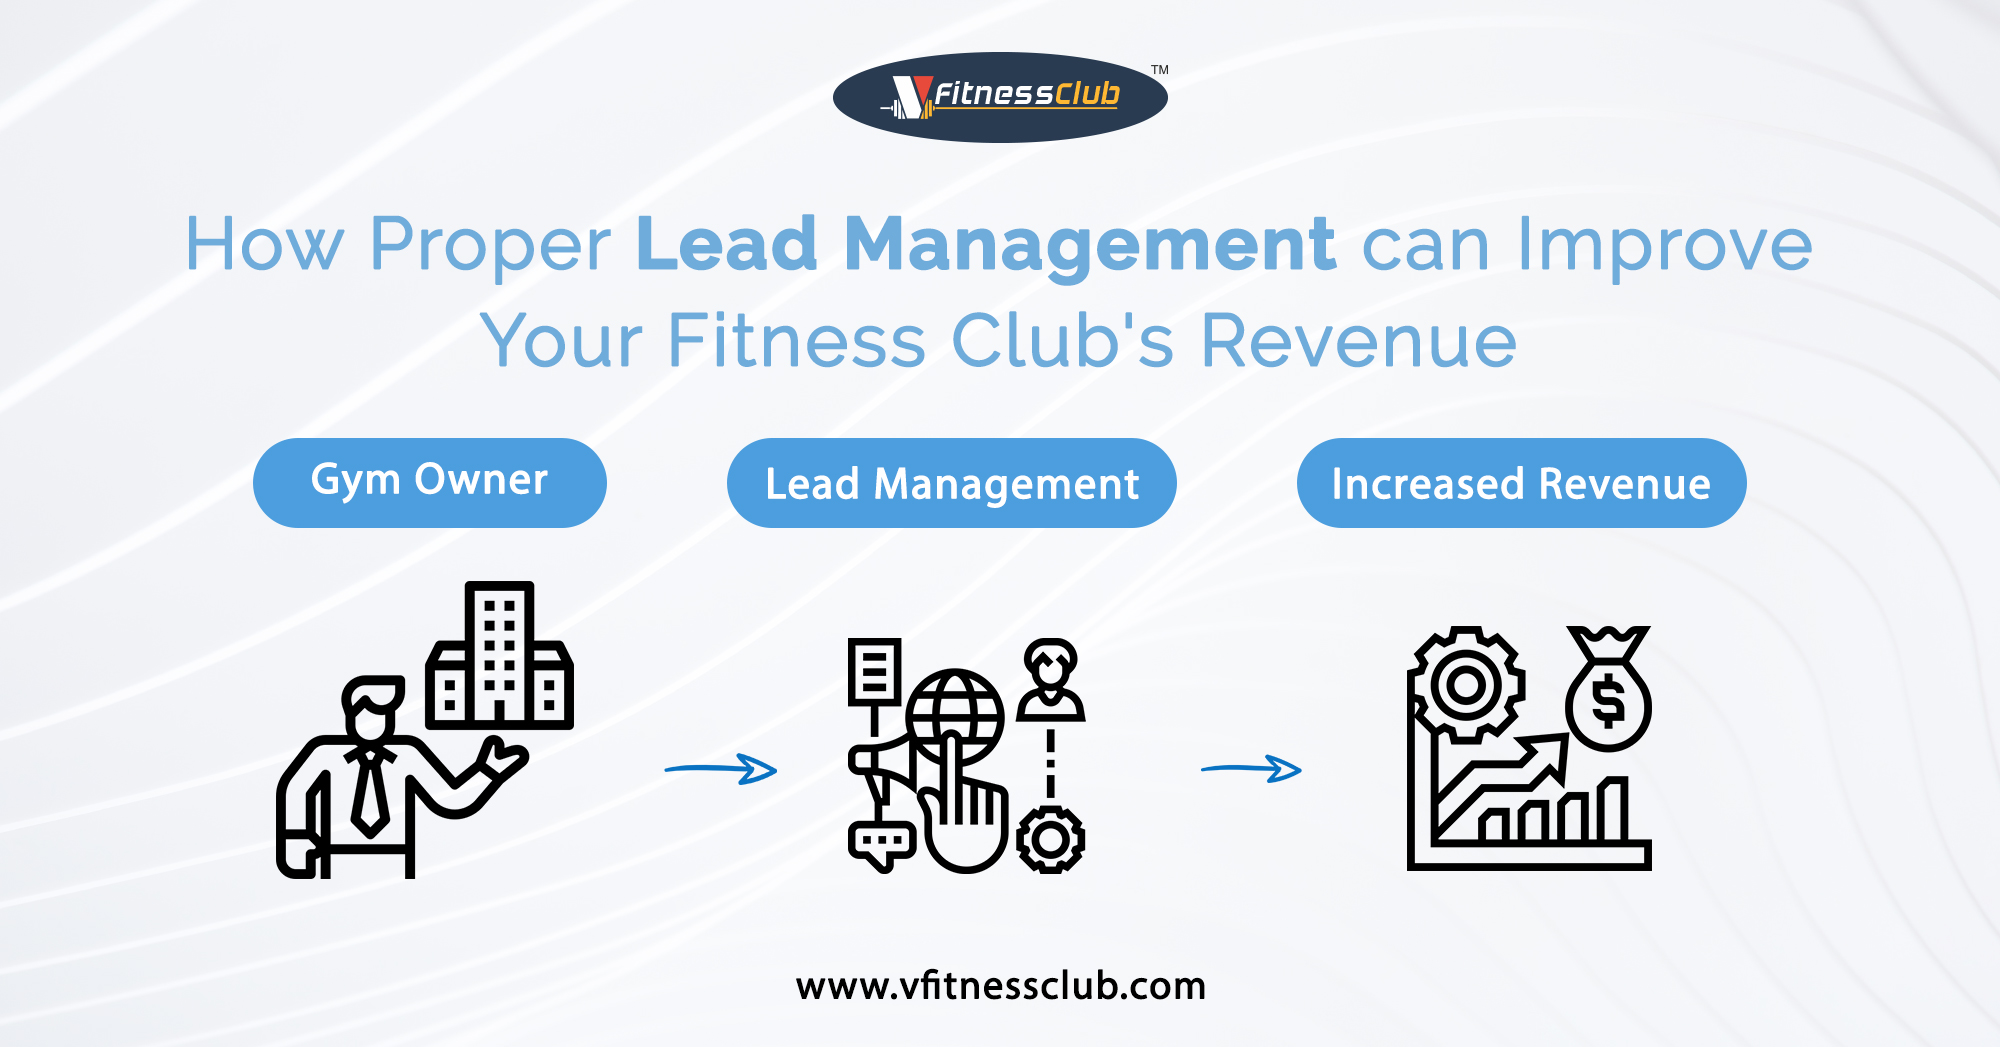 How Proper Lead Management can Improve Your Fitness Club's Revenue?